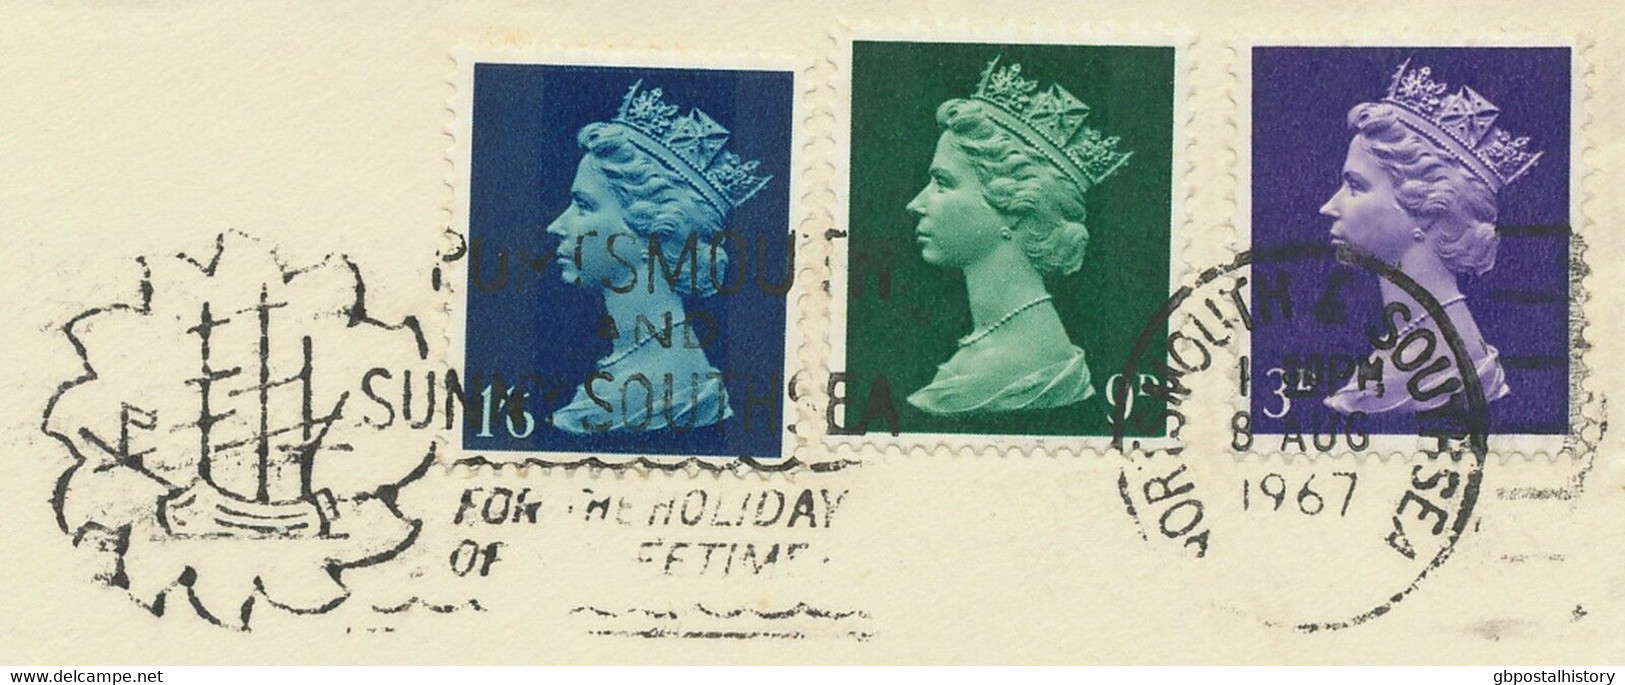 GB 1967 Machin 3D, 9D + 1 Sh 6D FDC PORTSMOUTH & SOUTHSEA - PORTSMOUTH AND SUNNY SOUTHSEA FOR THE HOLIDAY OF LIFETIME" - 1952-1971 Pre-Decimal Issues